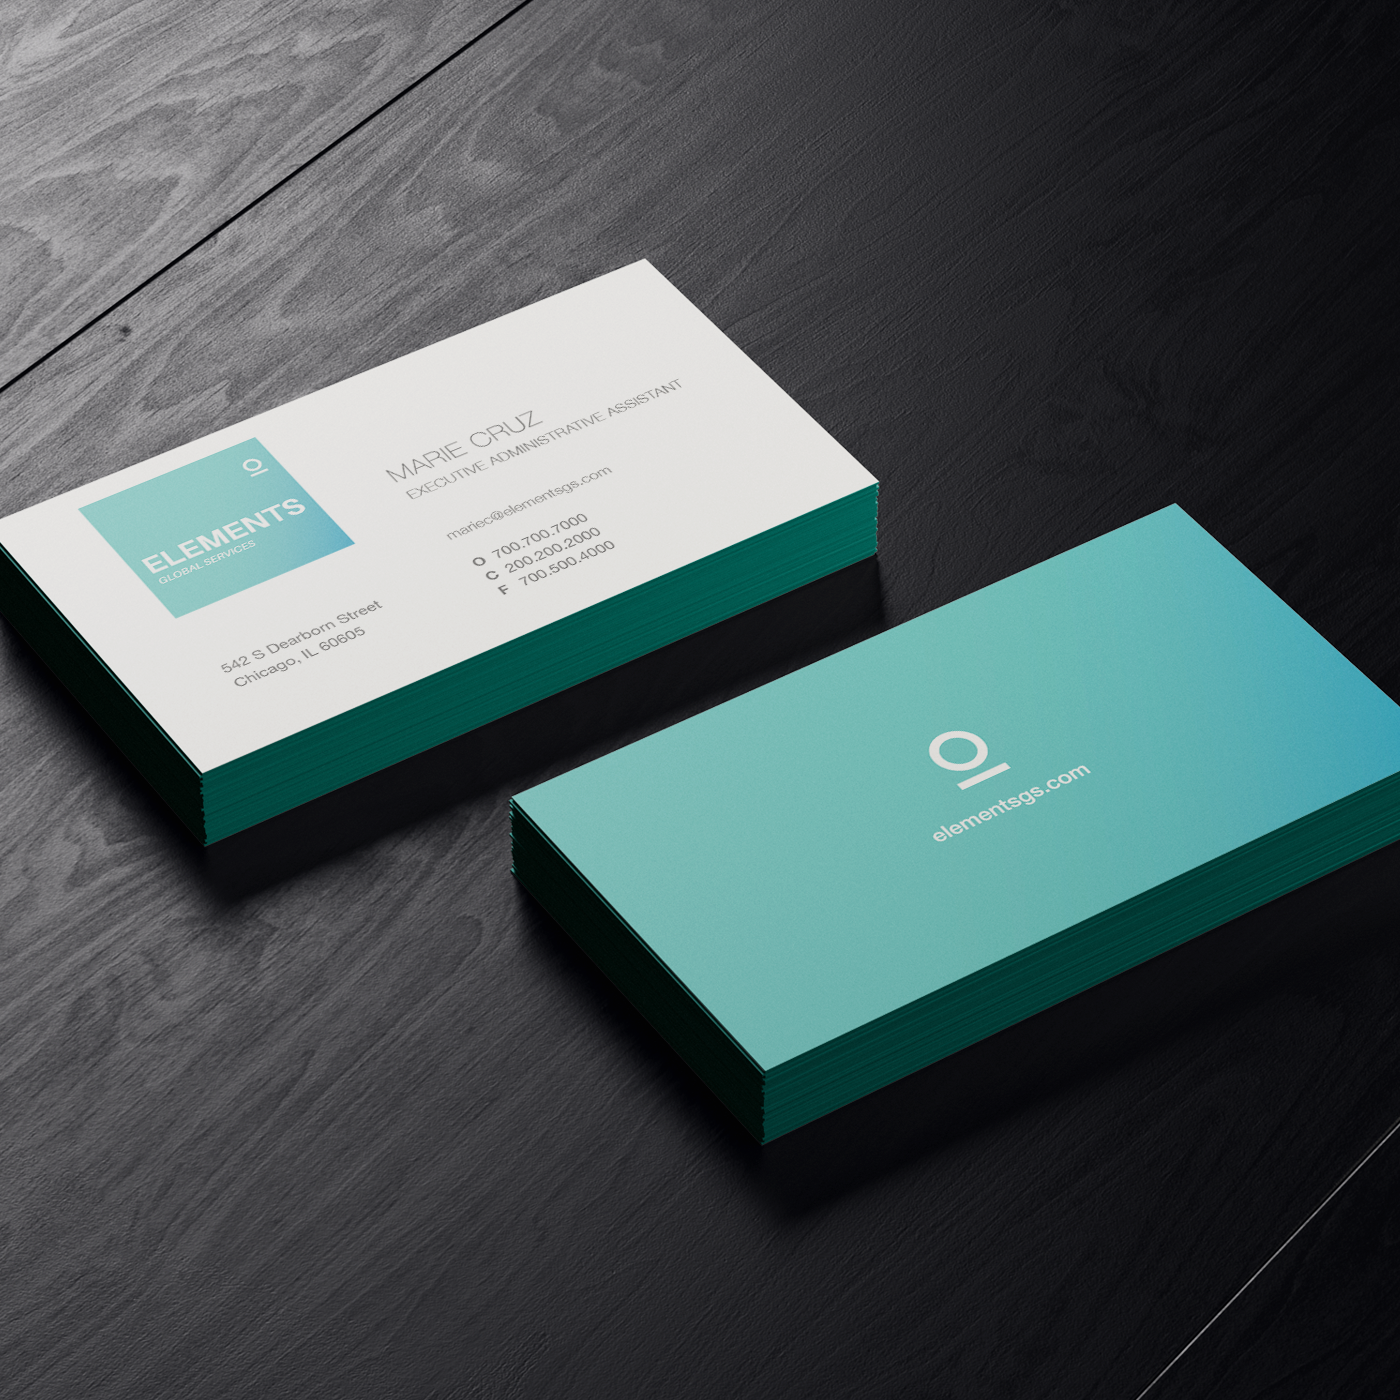 Business card design for a employment solutions company.